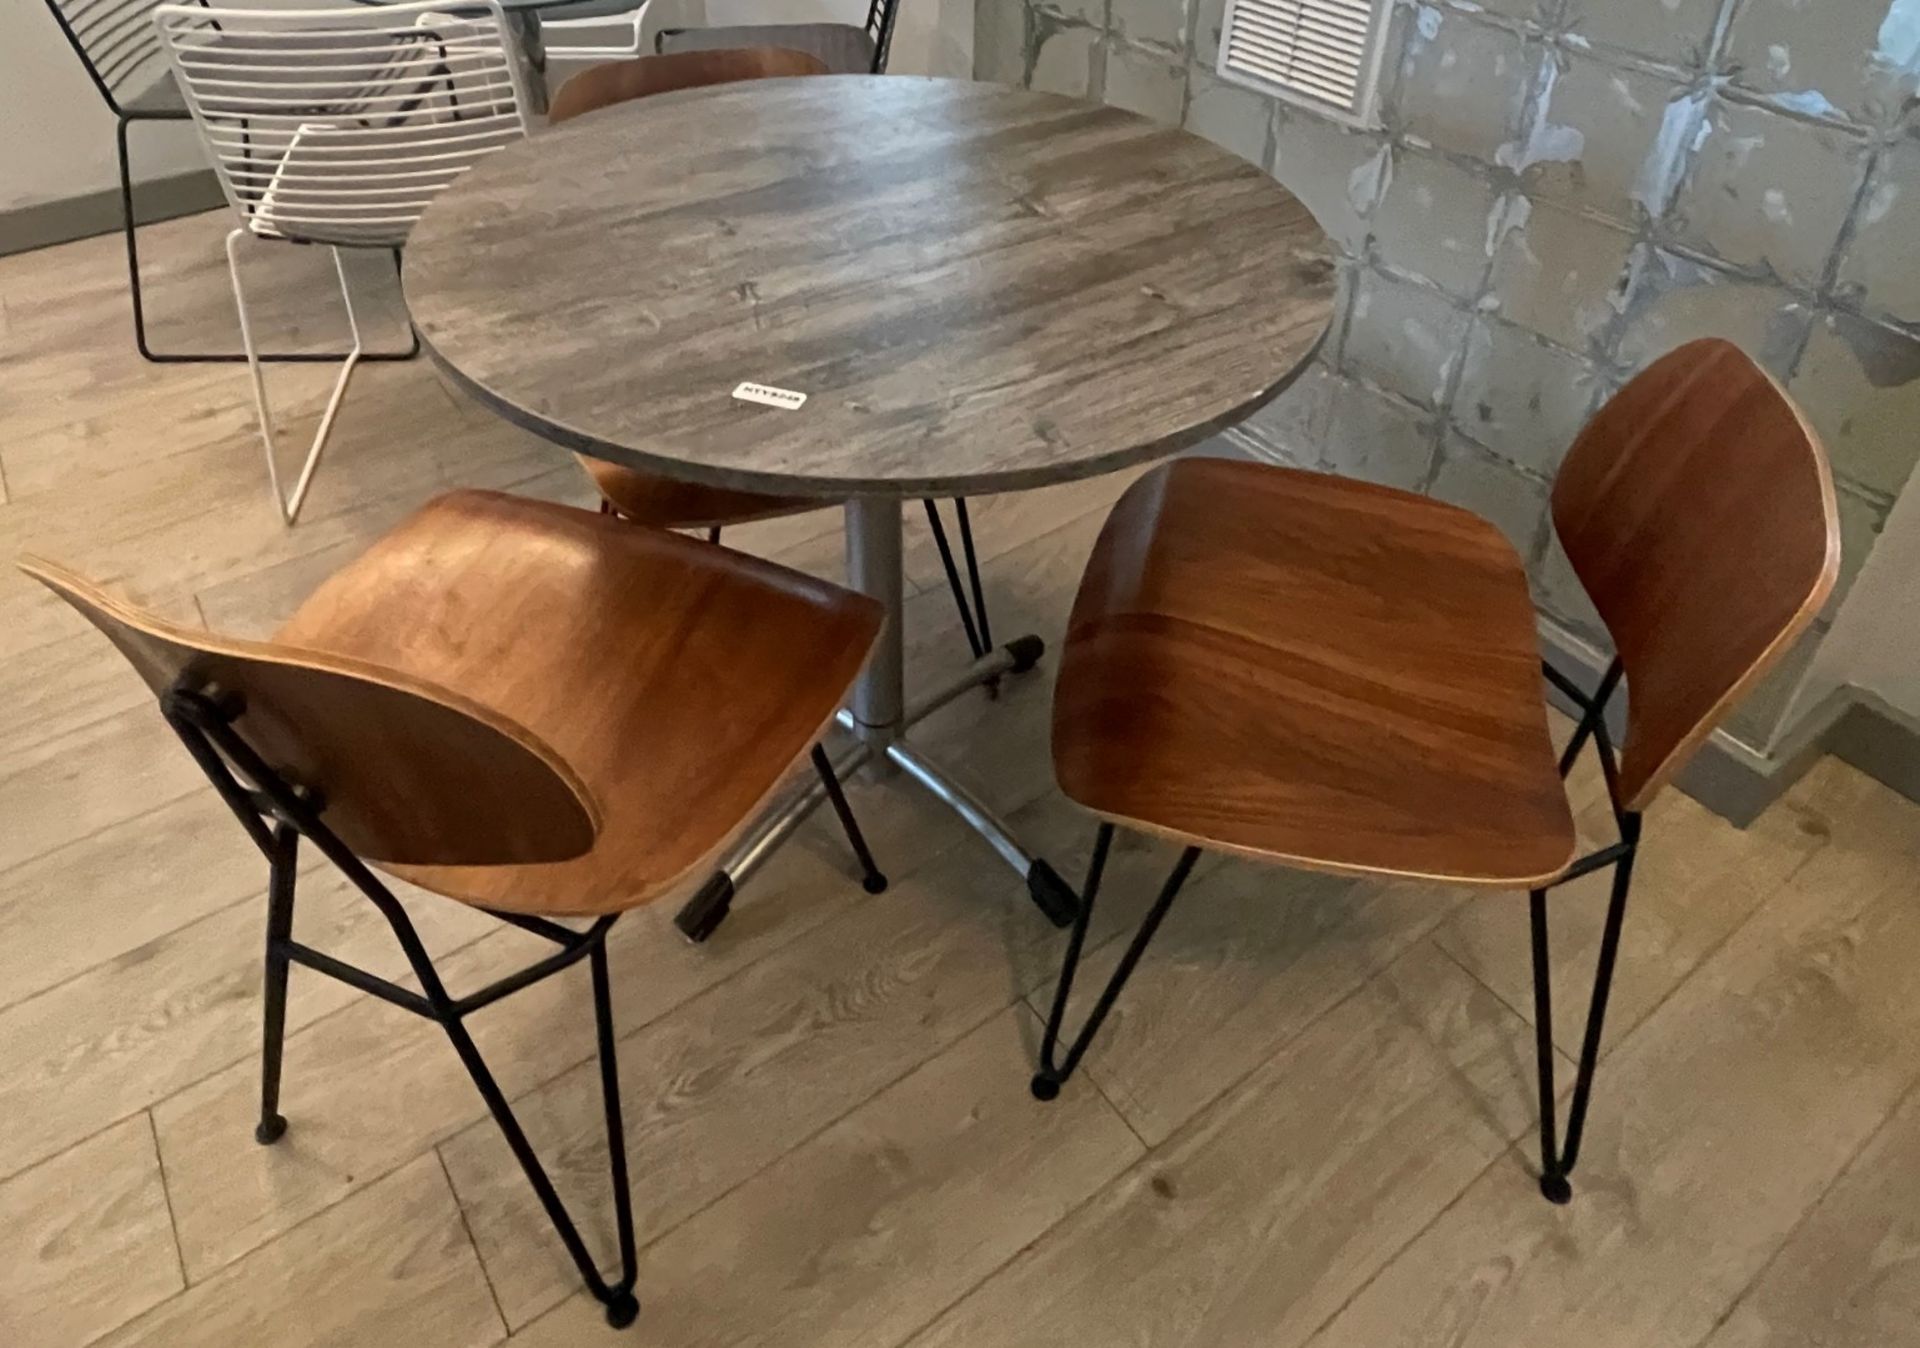 1 x Round 80cm Wooden Driftwood Table With Chrome Base and Three Contemporary Chairs - Ref: - Image 2 of 5